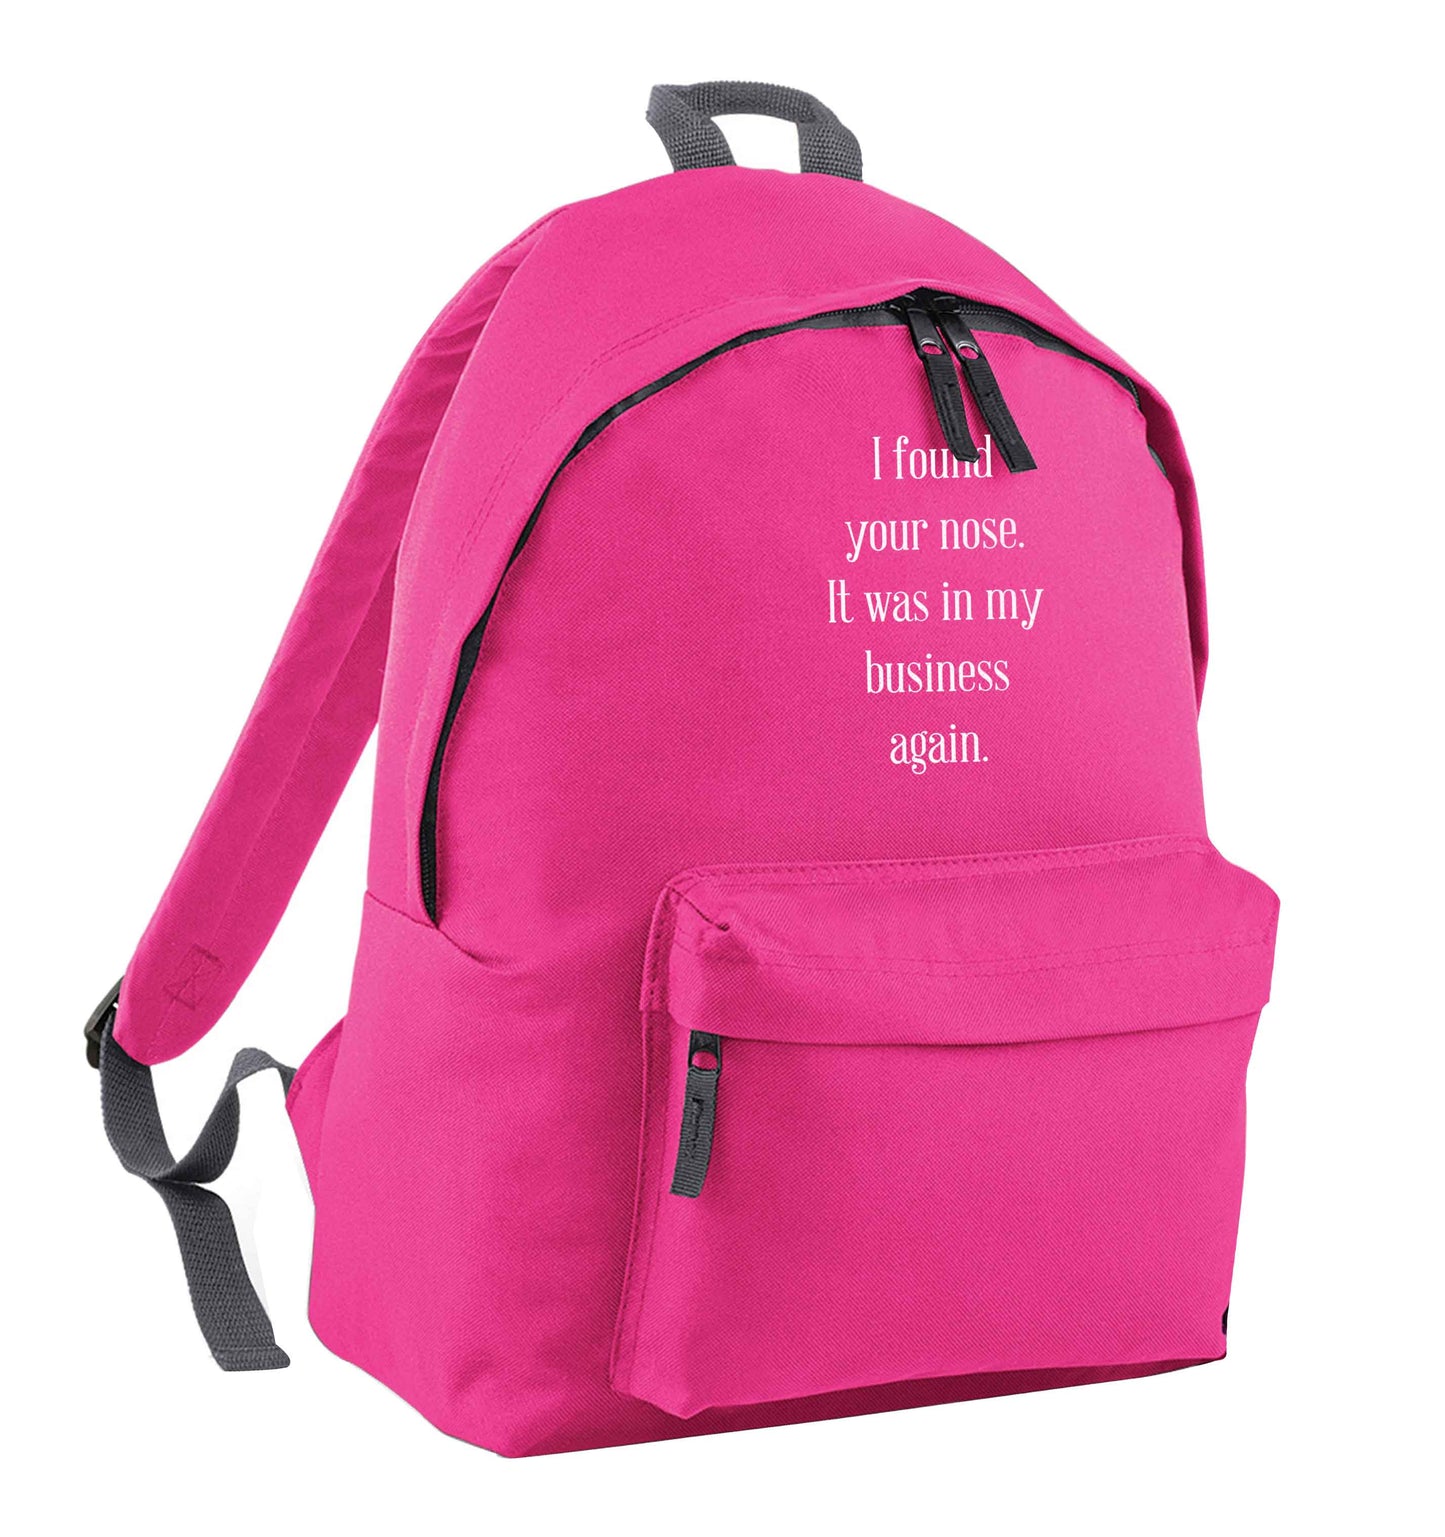 I found your nose it was in my business again pink children's backpack